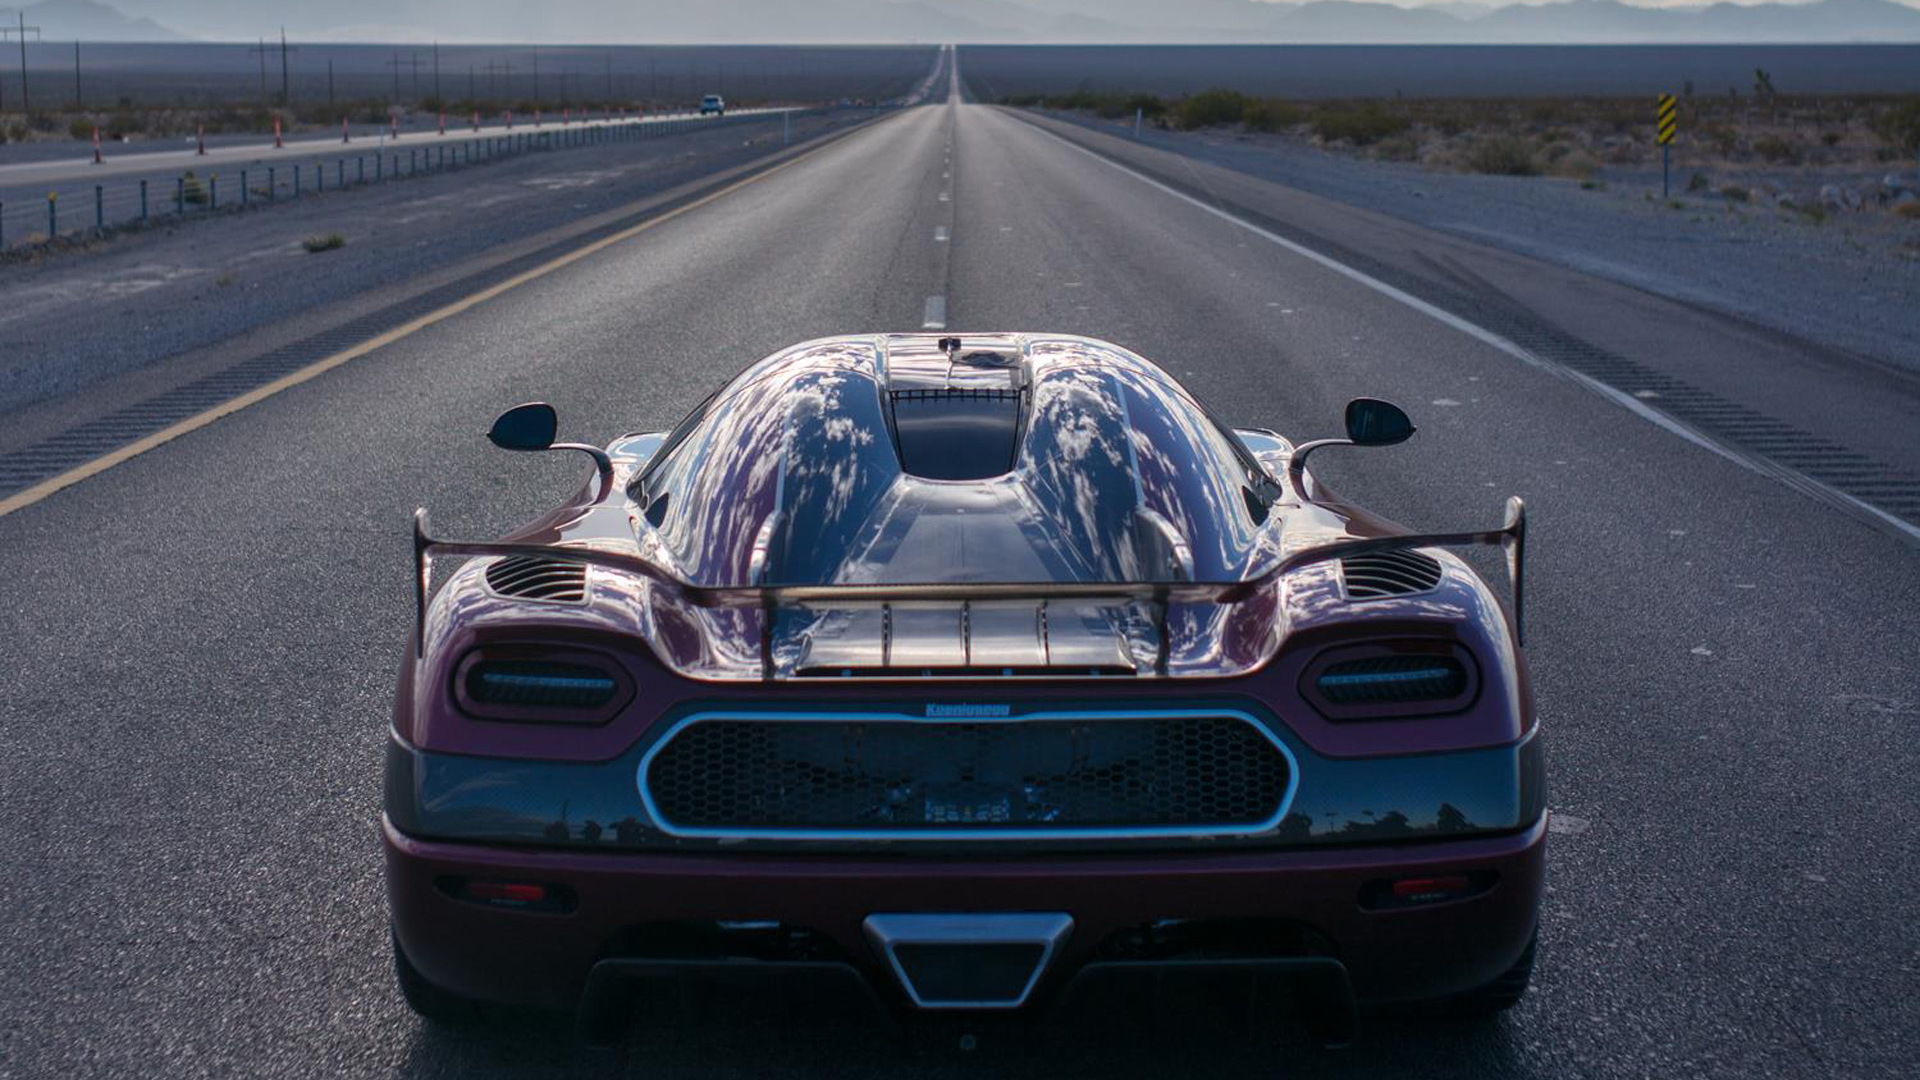 Koenigsegg Agera RS sets production car land speed record of 277.9 mph